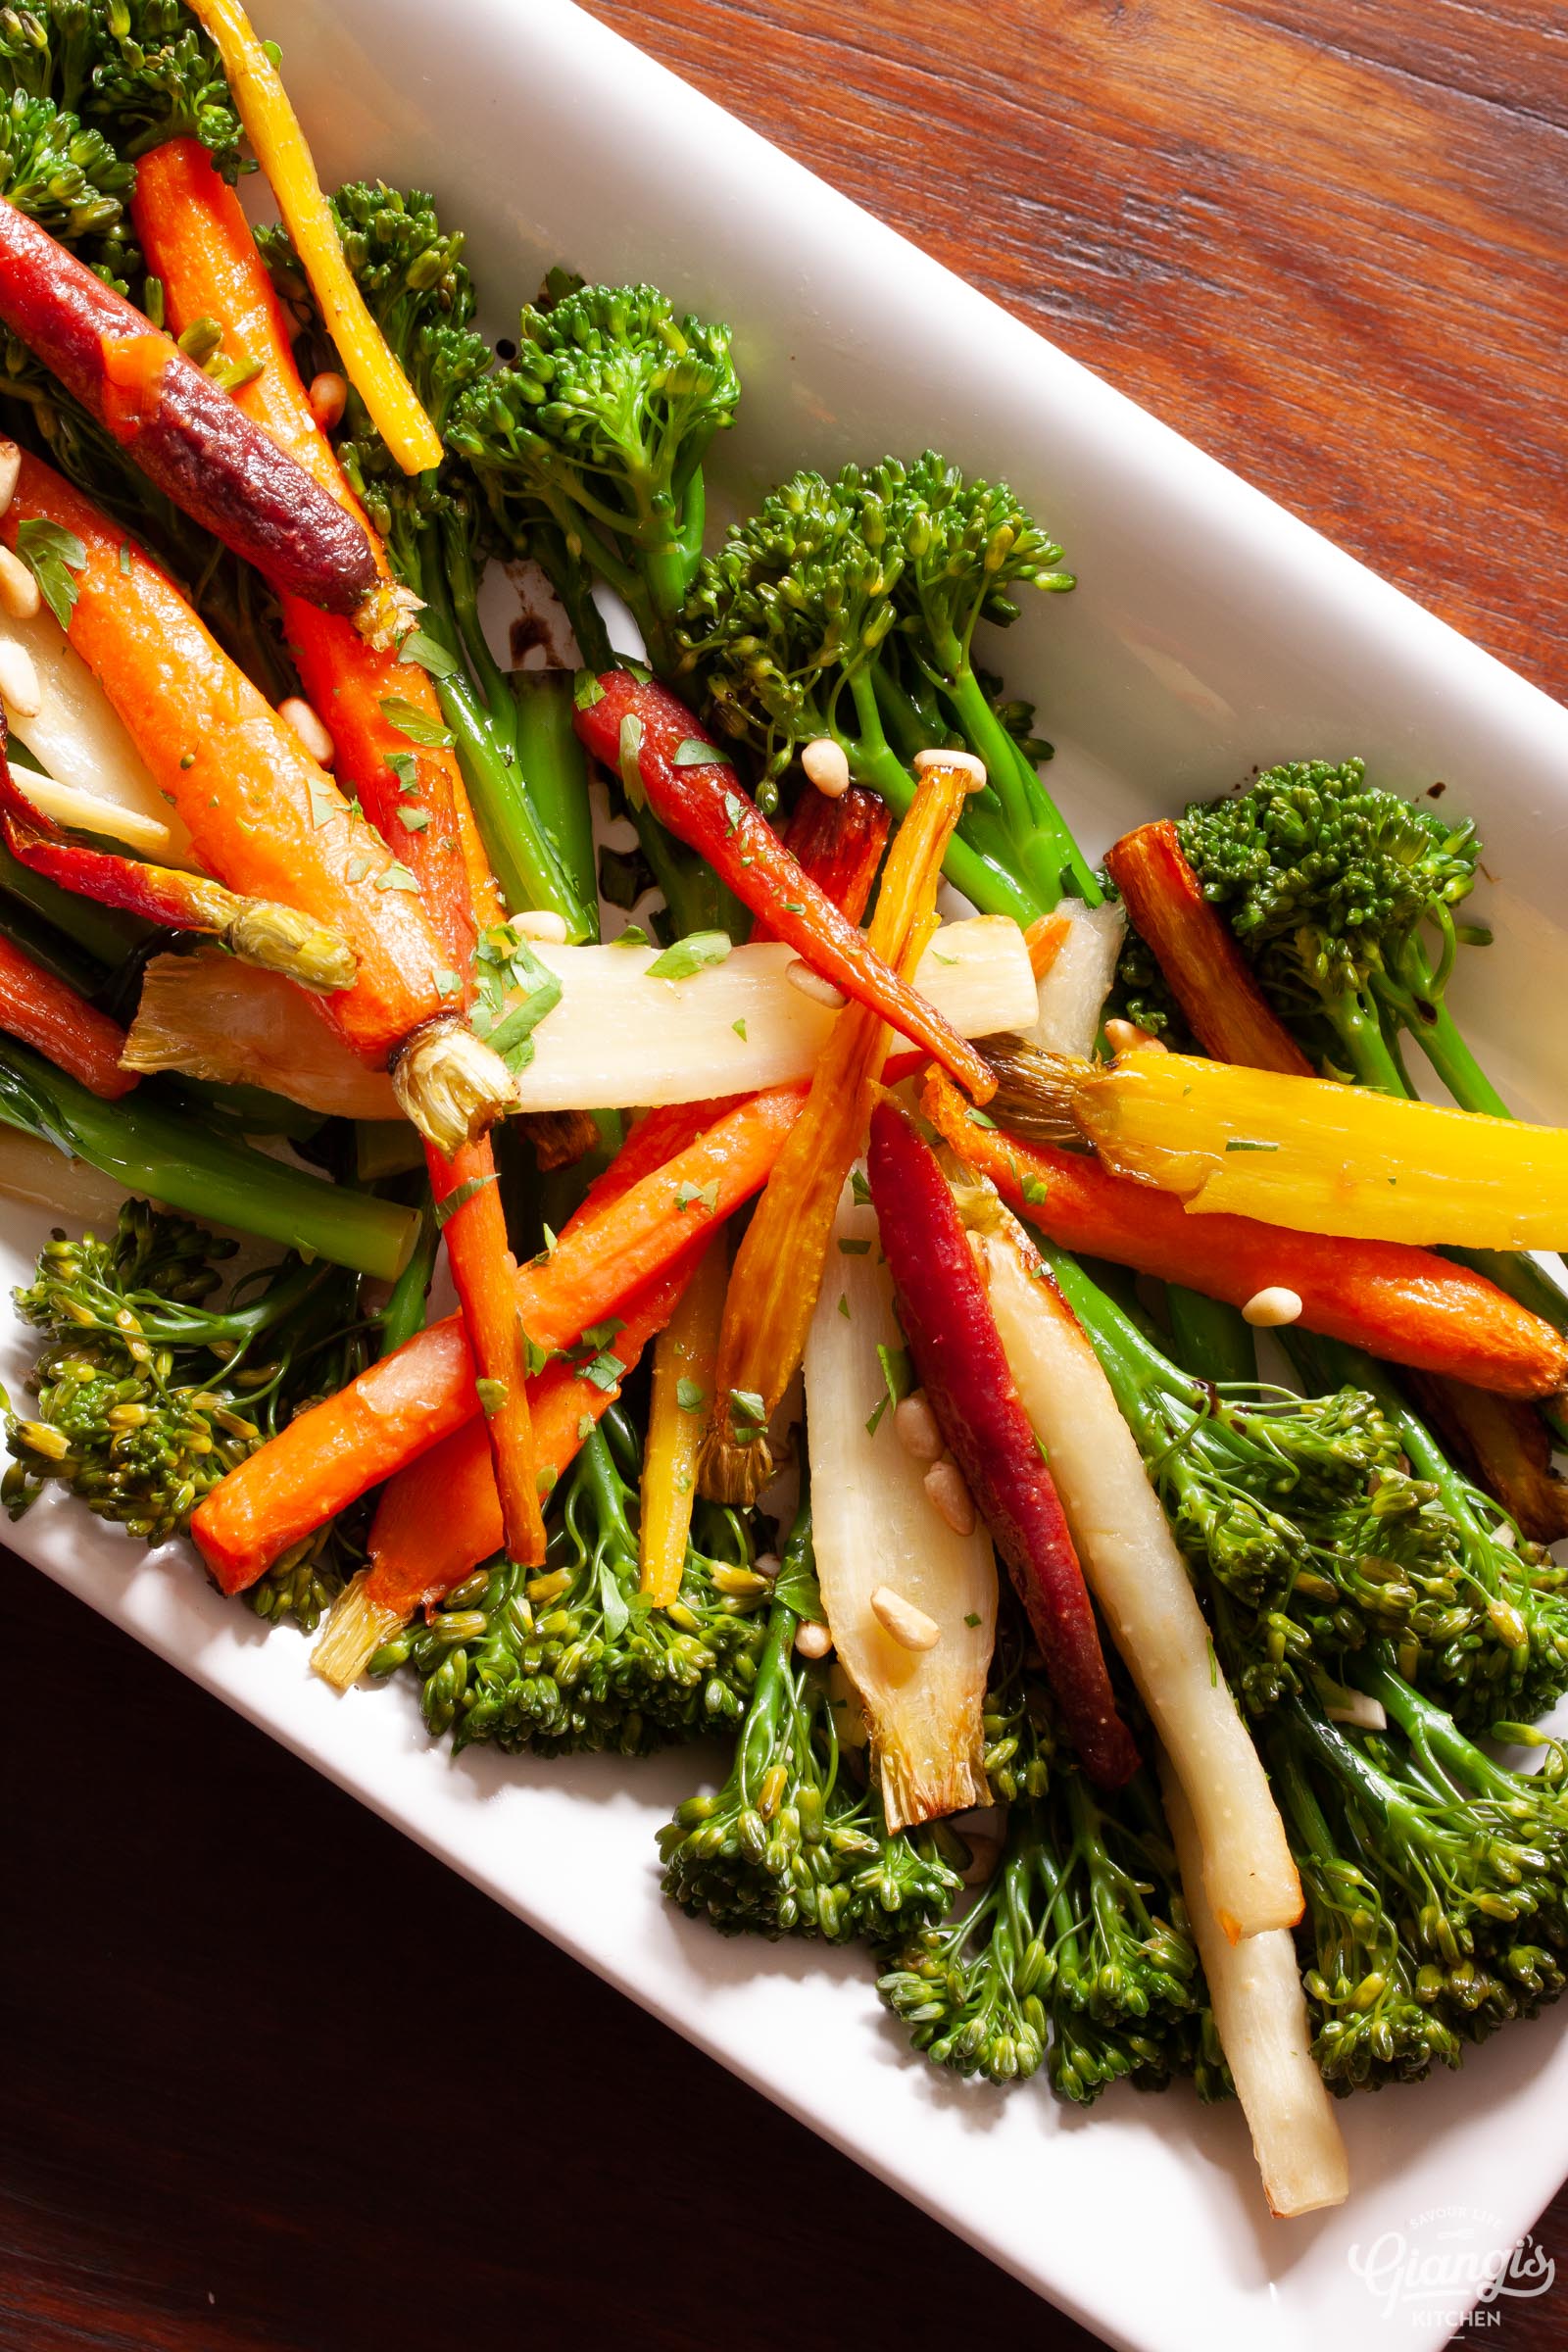 Broccolini and Carrots